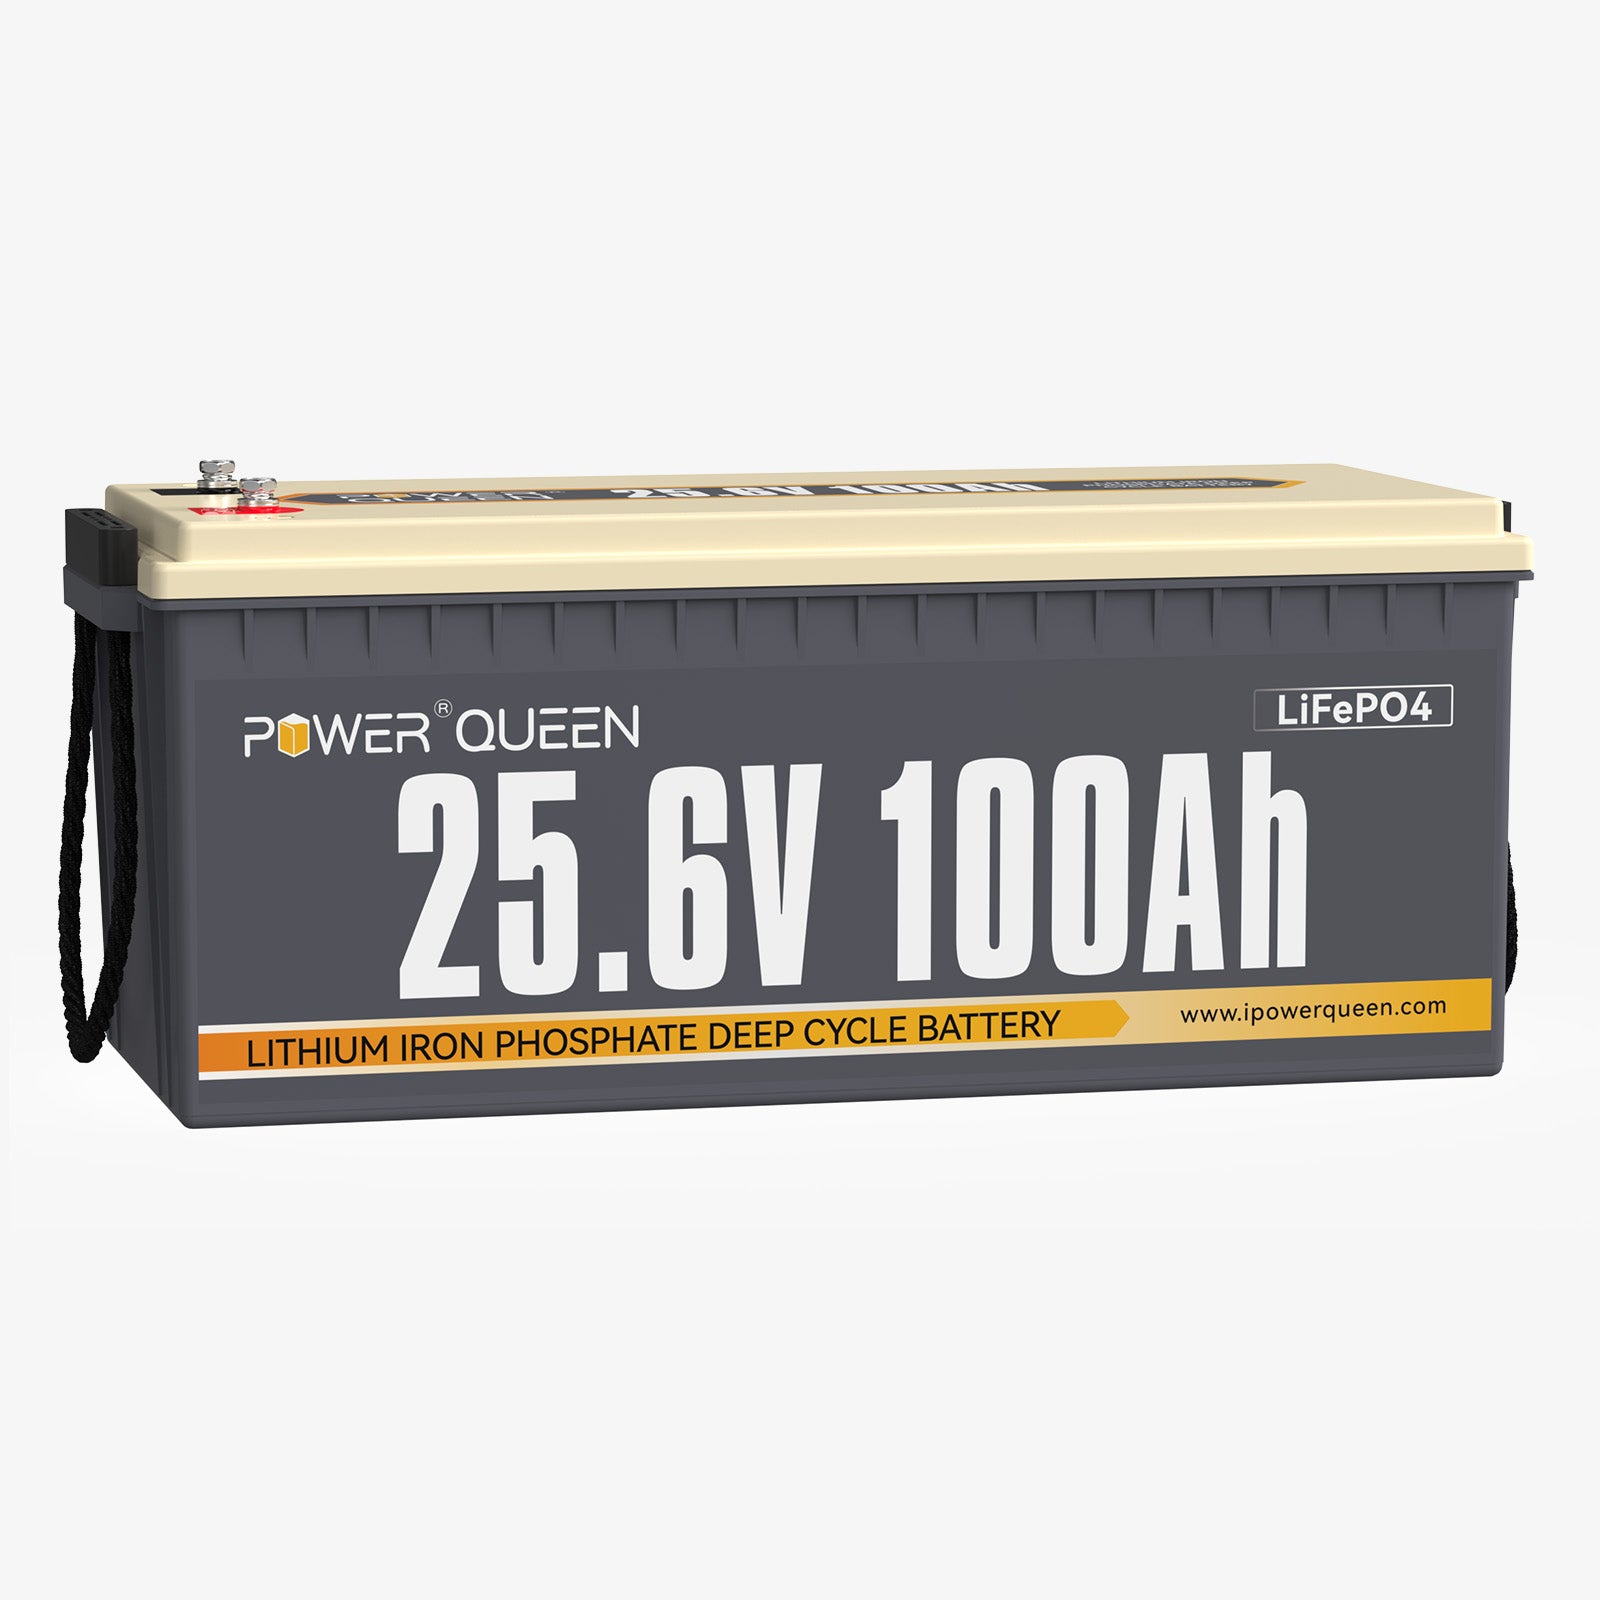 12.8V 200Ah LiFePO4 Battery, Built-in 100A BMS freeshipping